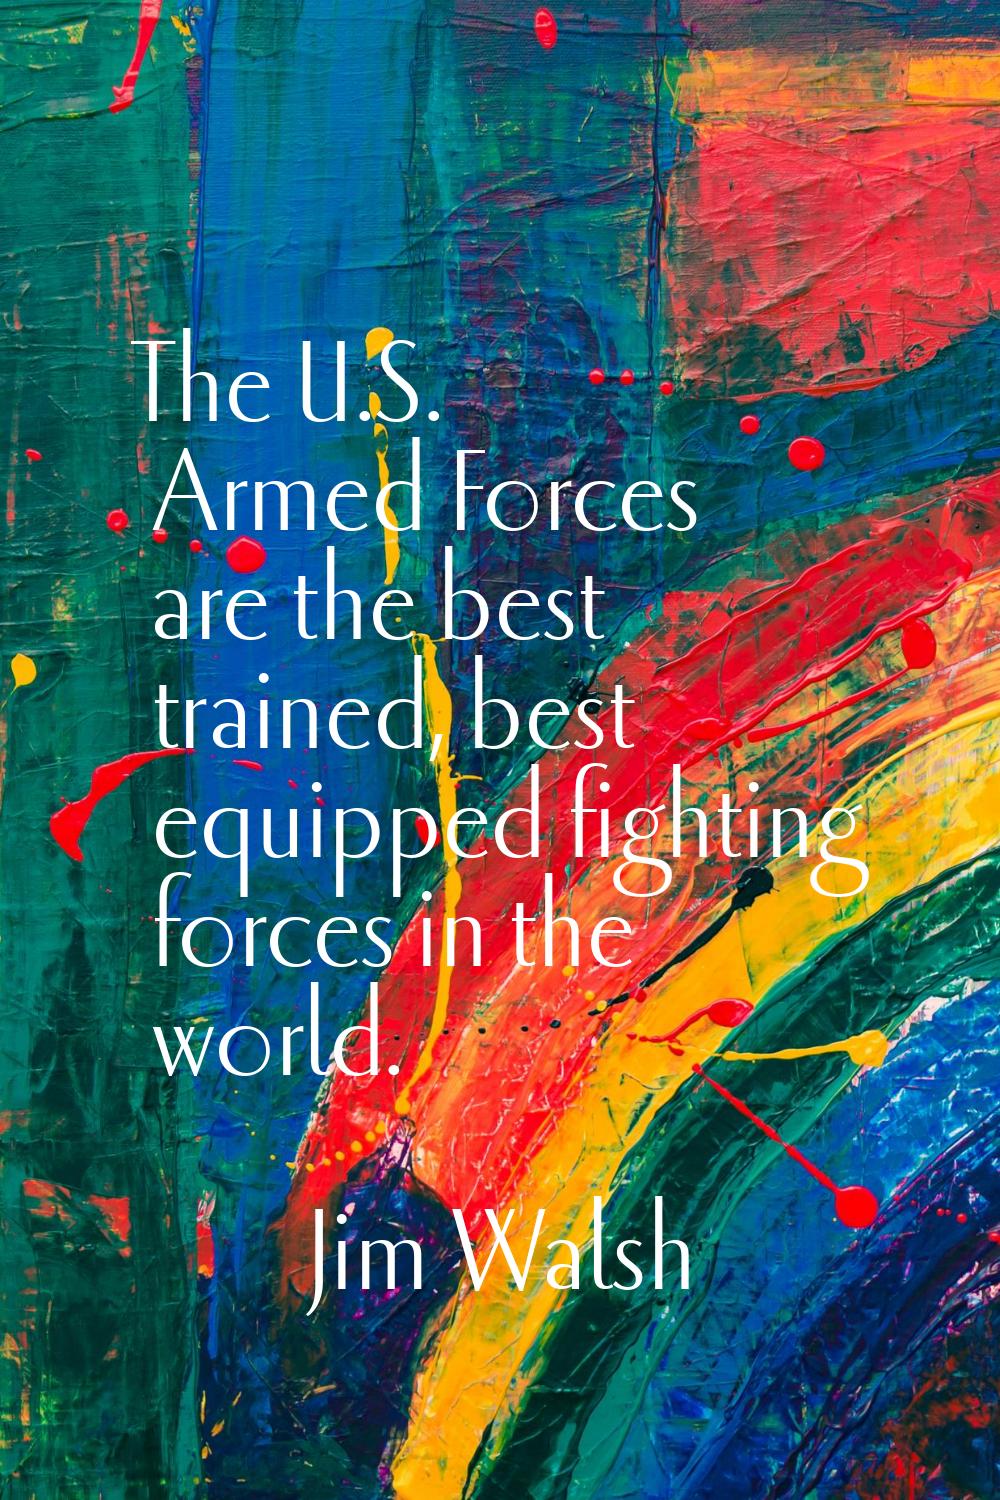 The U.S. Armed Forces are the best trained, best equipped fighting forces in the world.